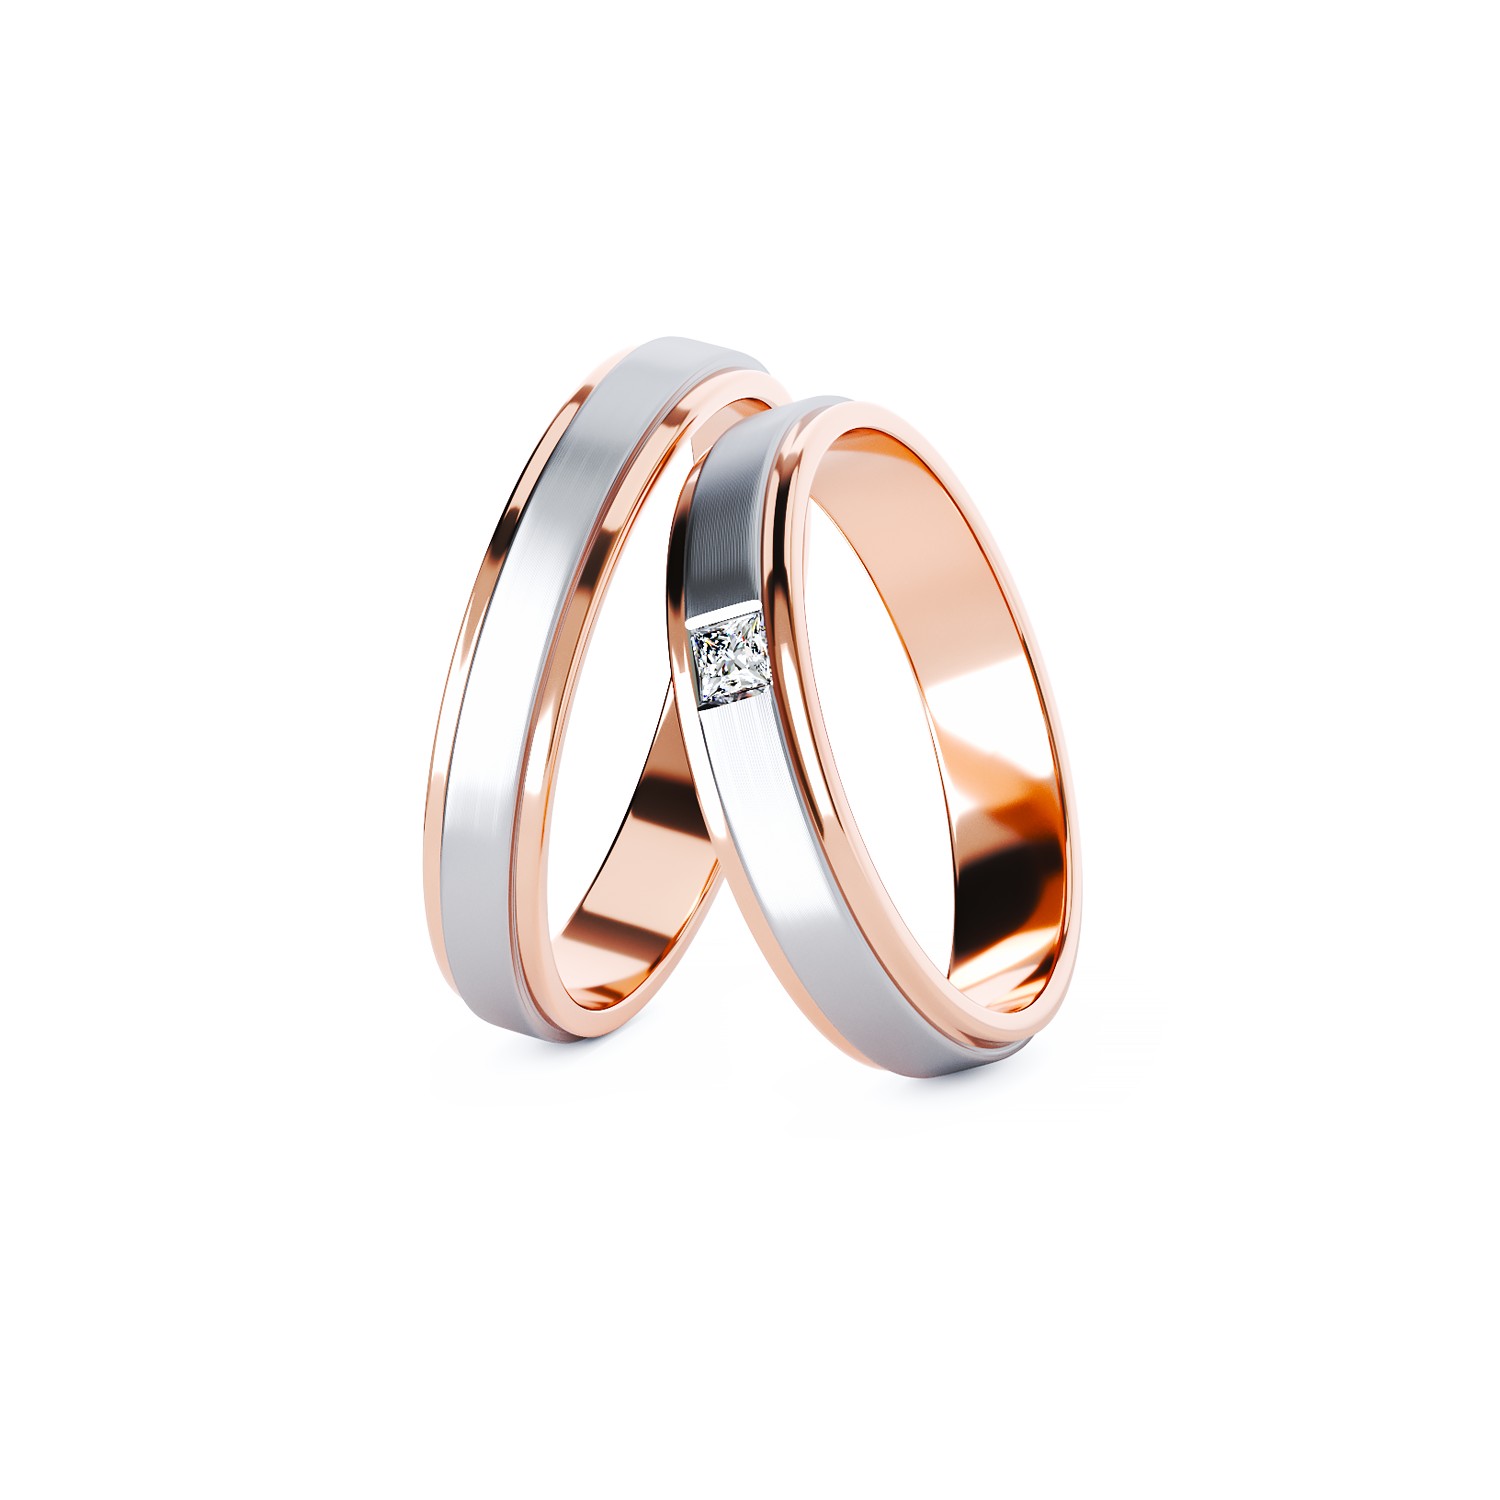 14K rose-white-rose gold TEI-COMELY wedding bands